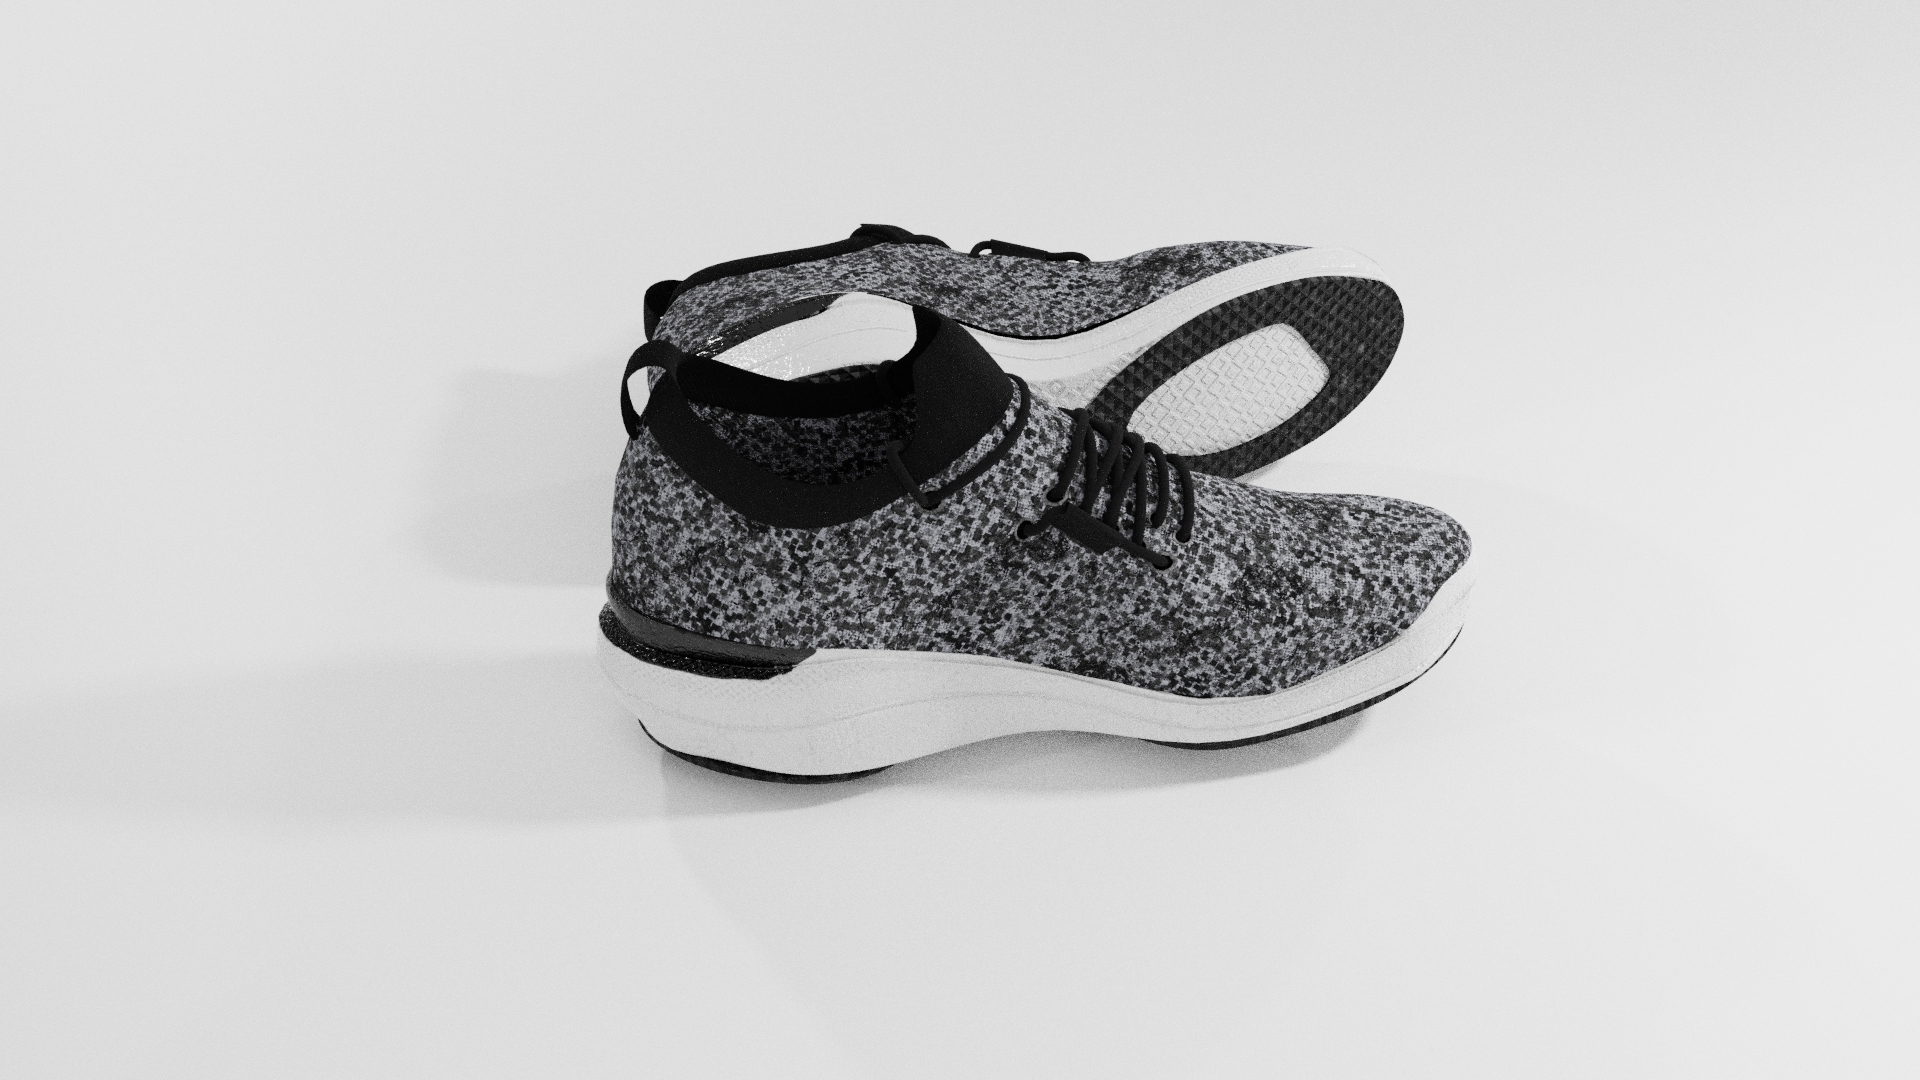 3D Sneakers Black And White Fabric Model - TurboSquid 2087800